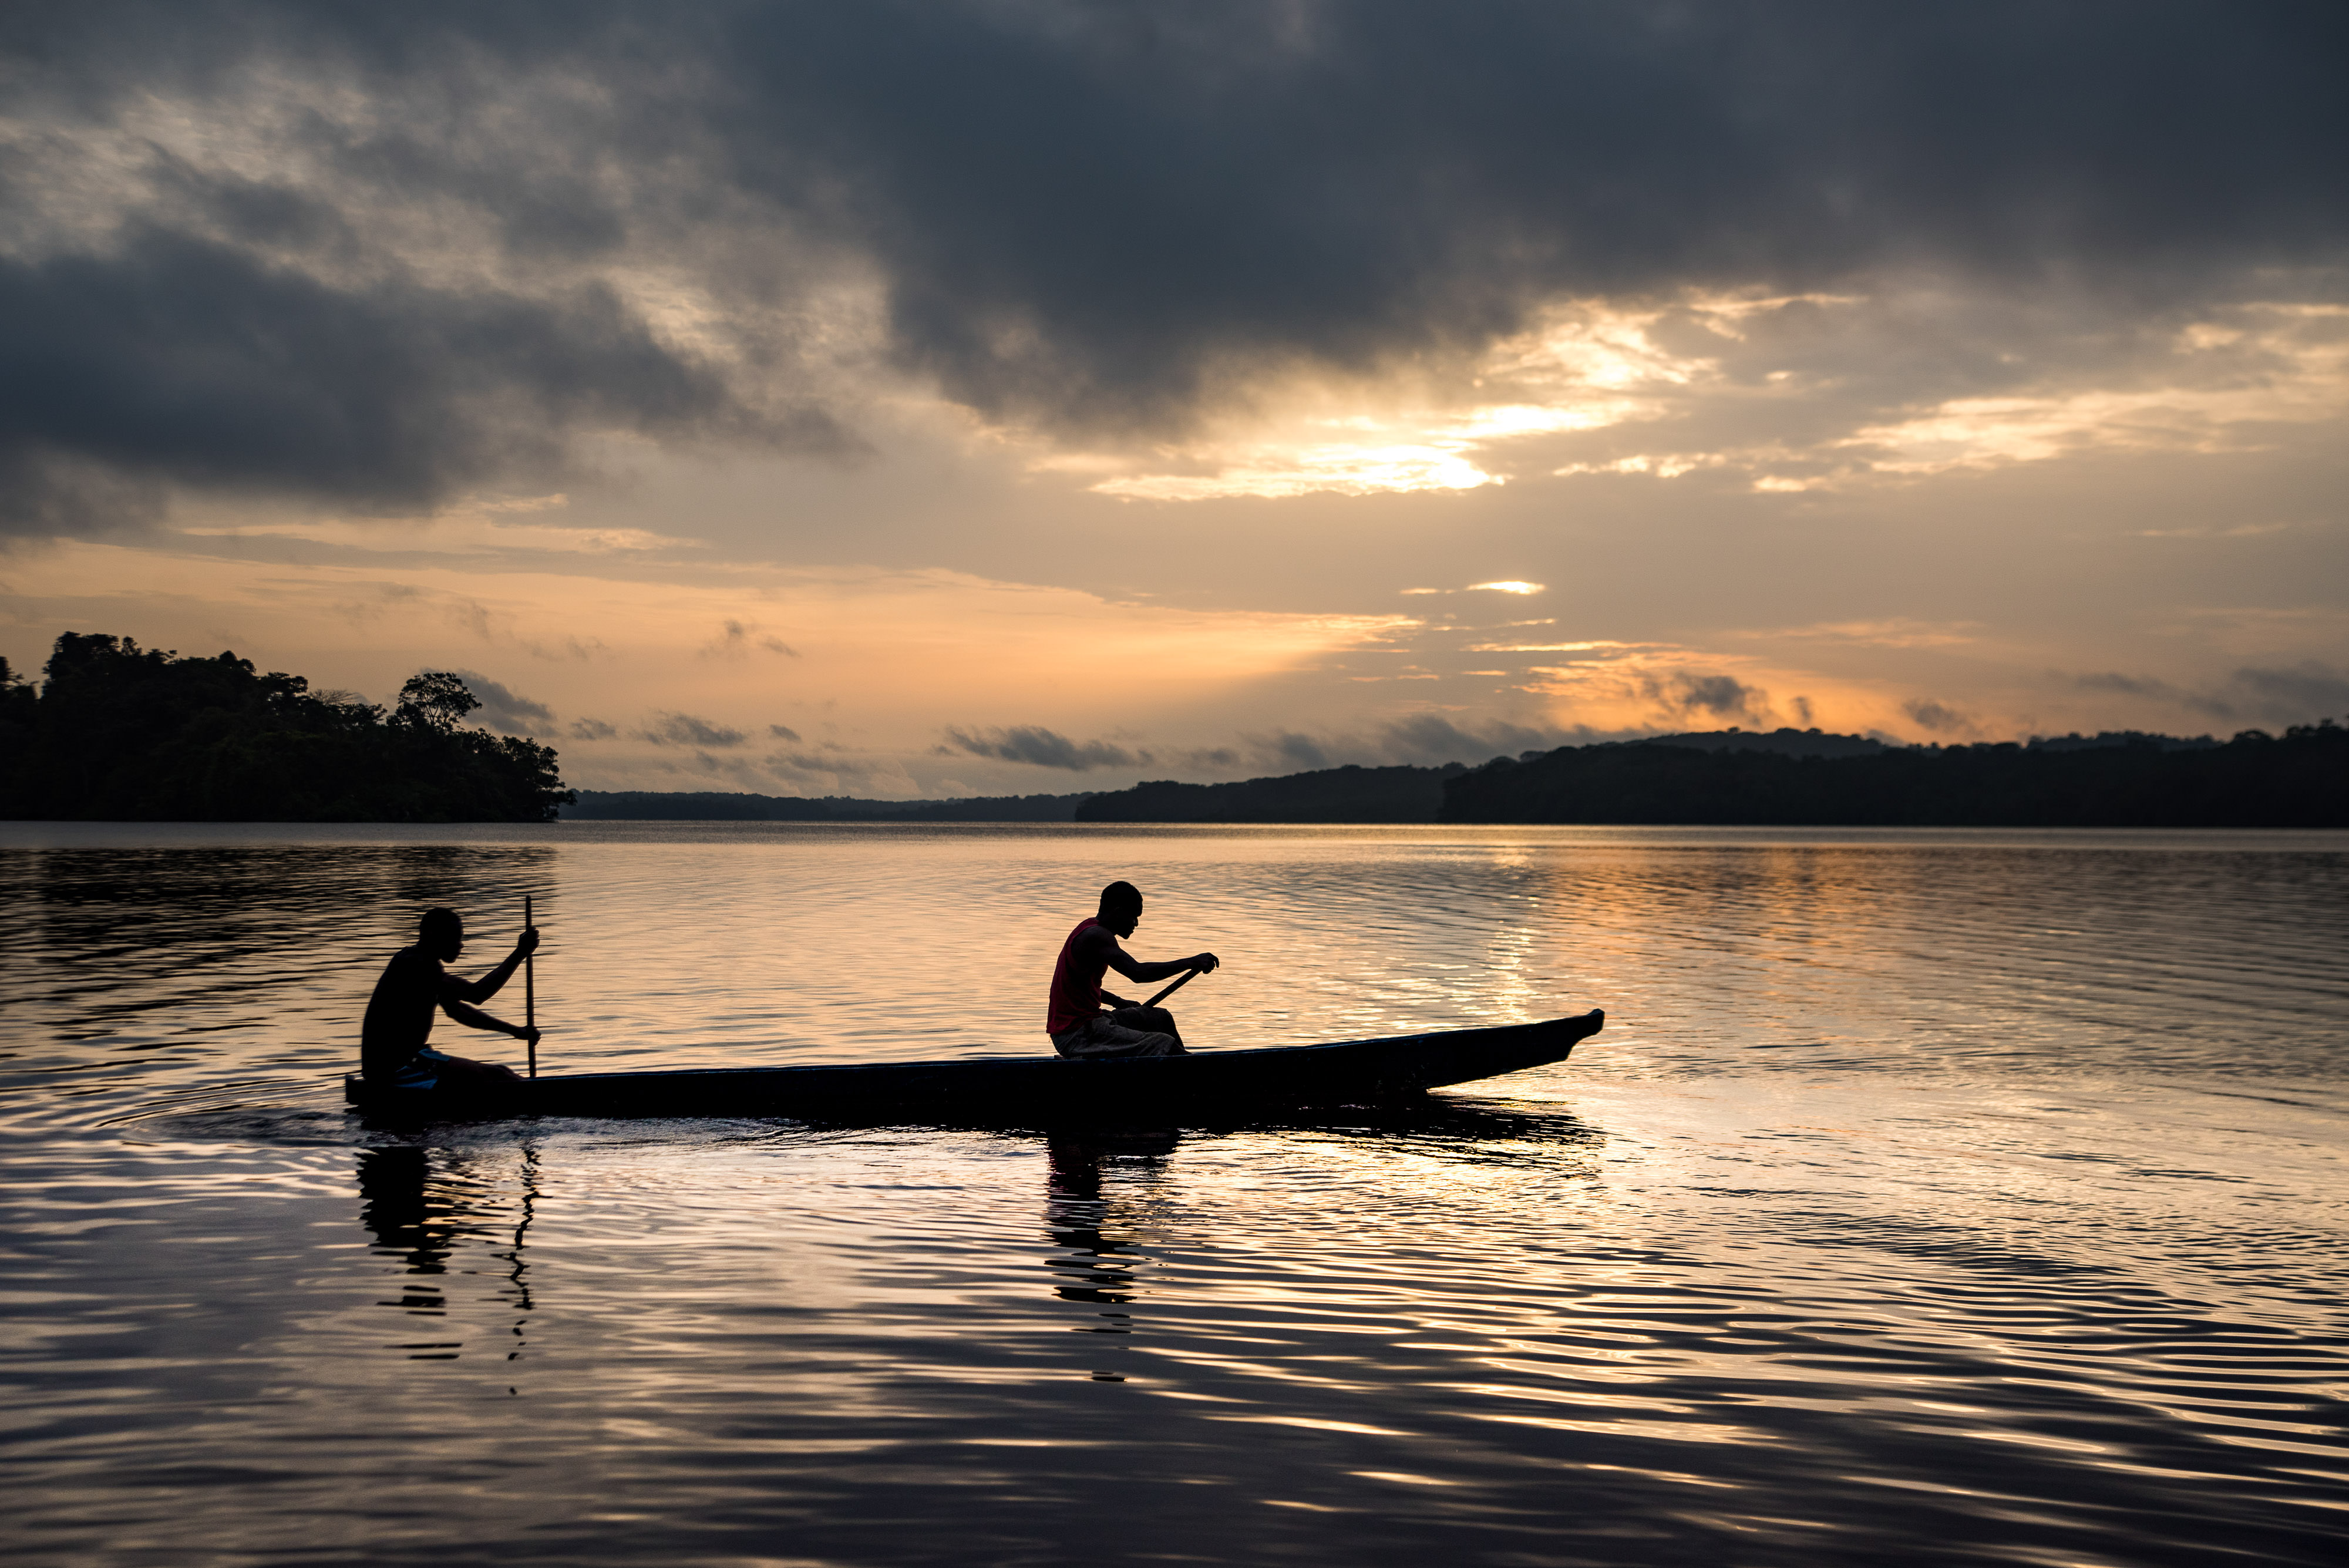 Two fishermen in a canoe at sunrise